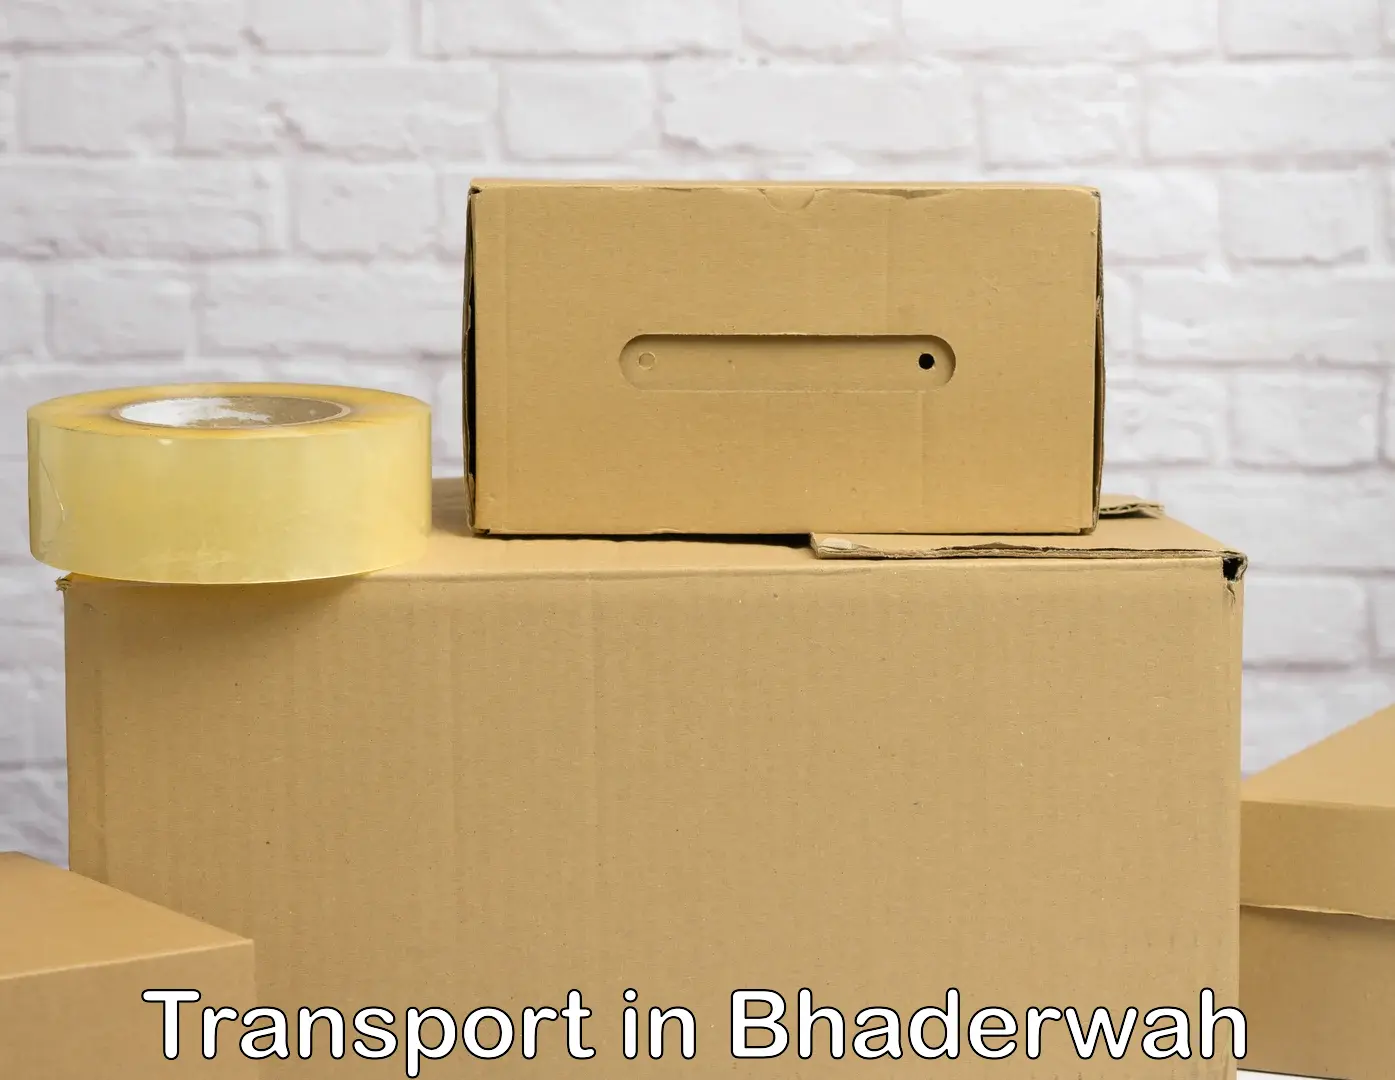 Commercial transport service in Bhaderwah